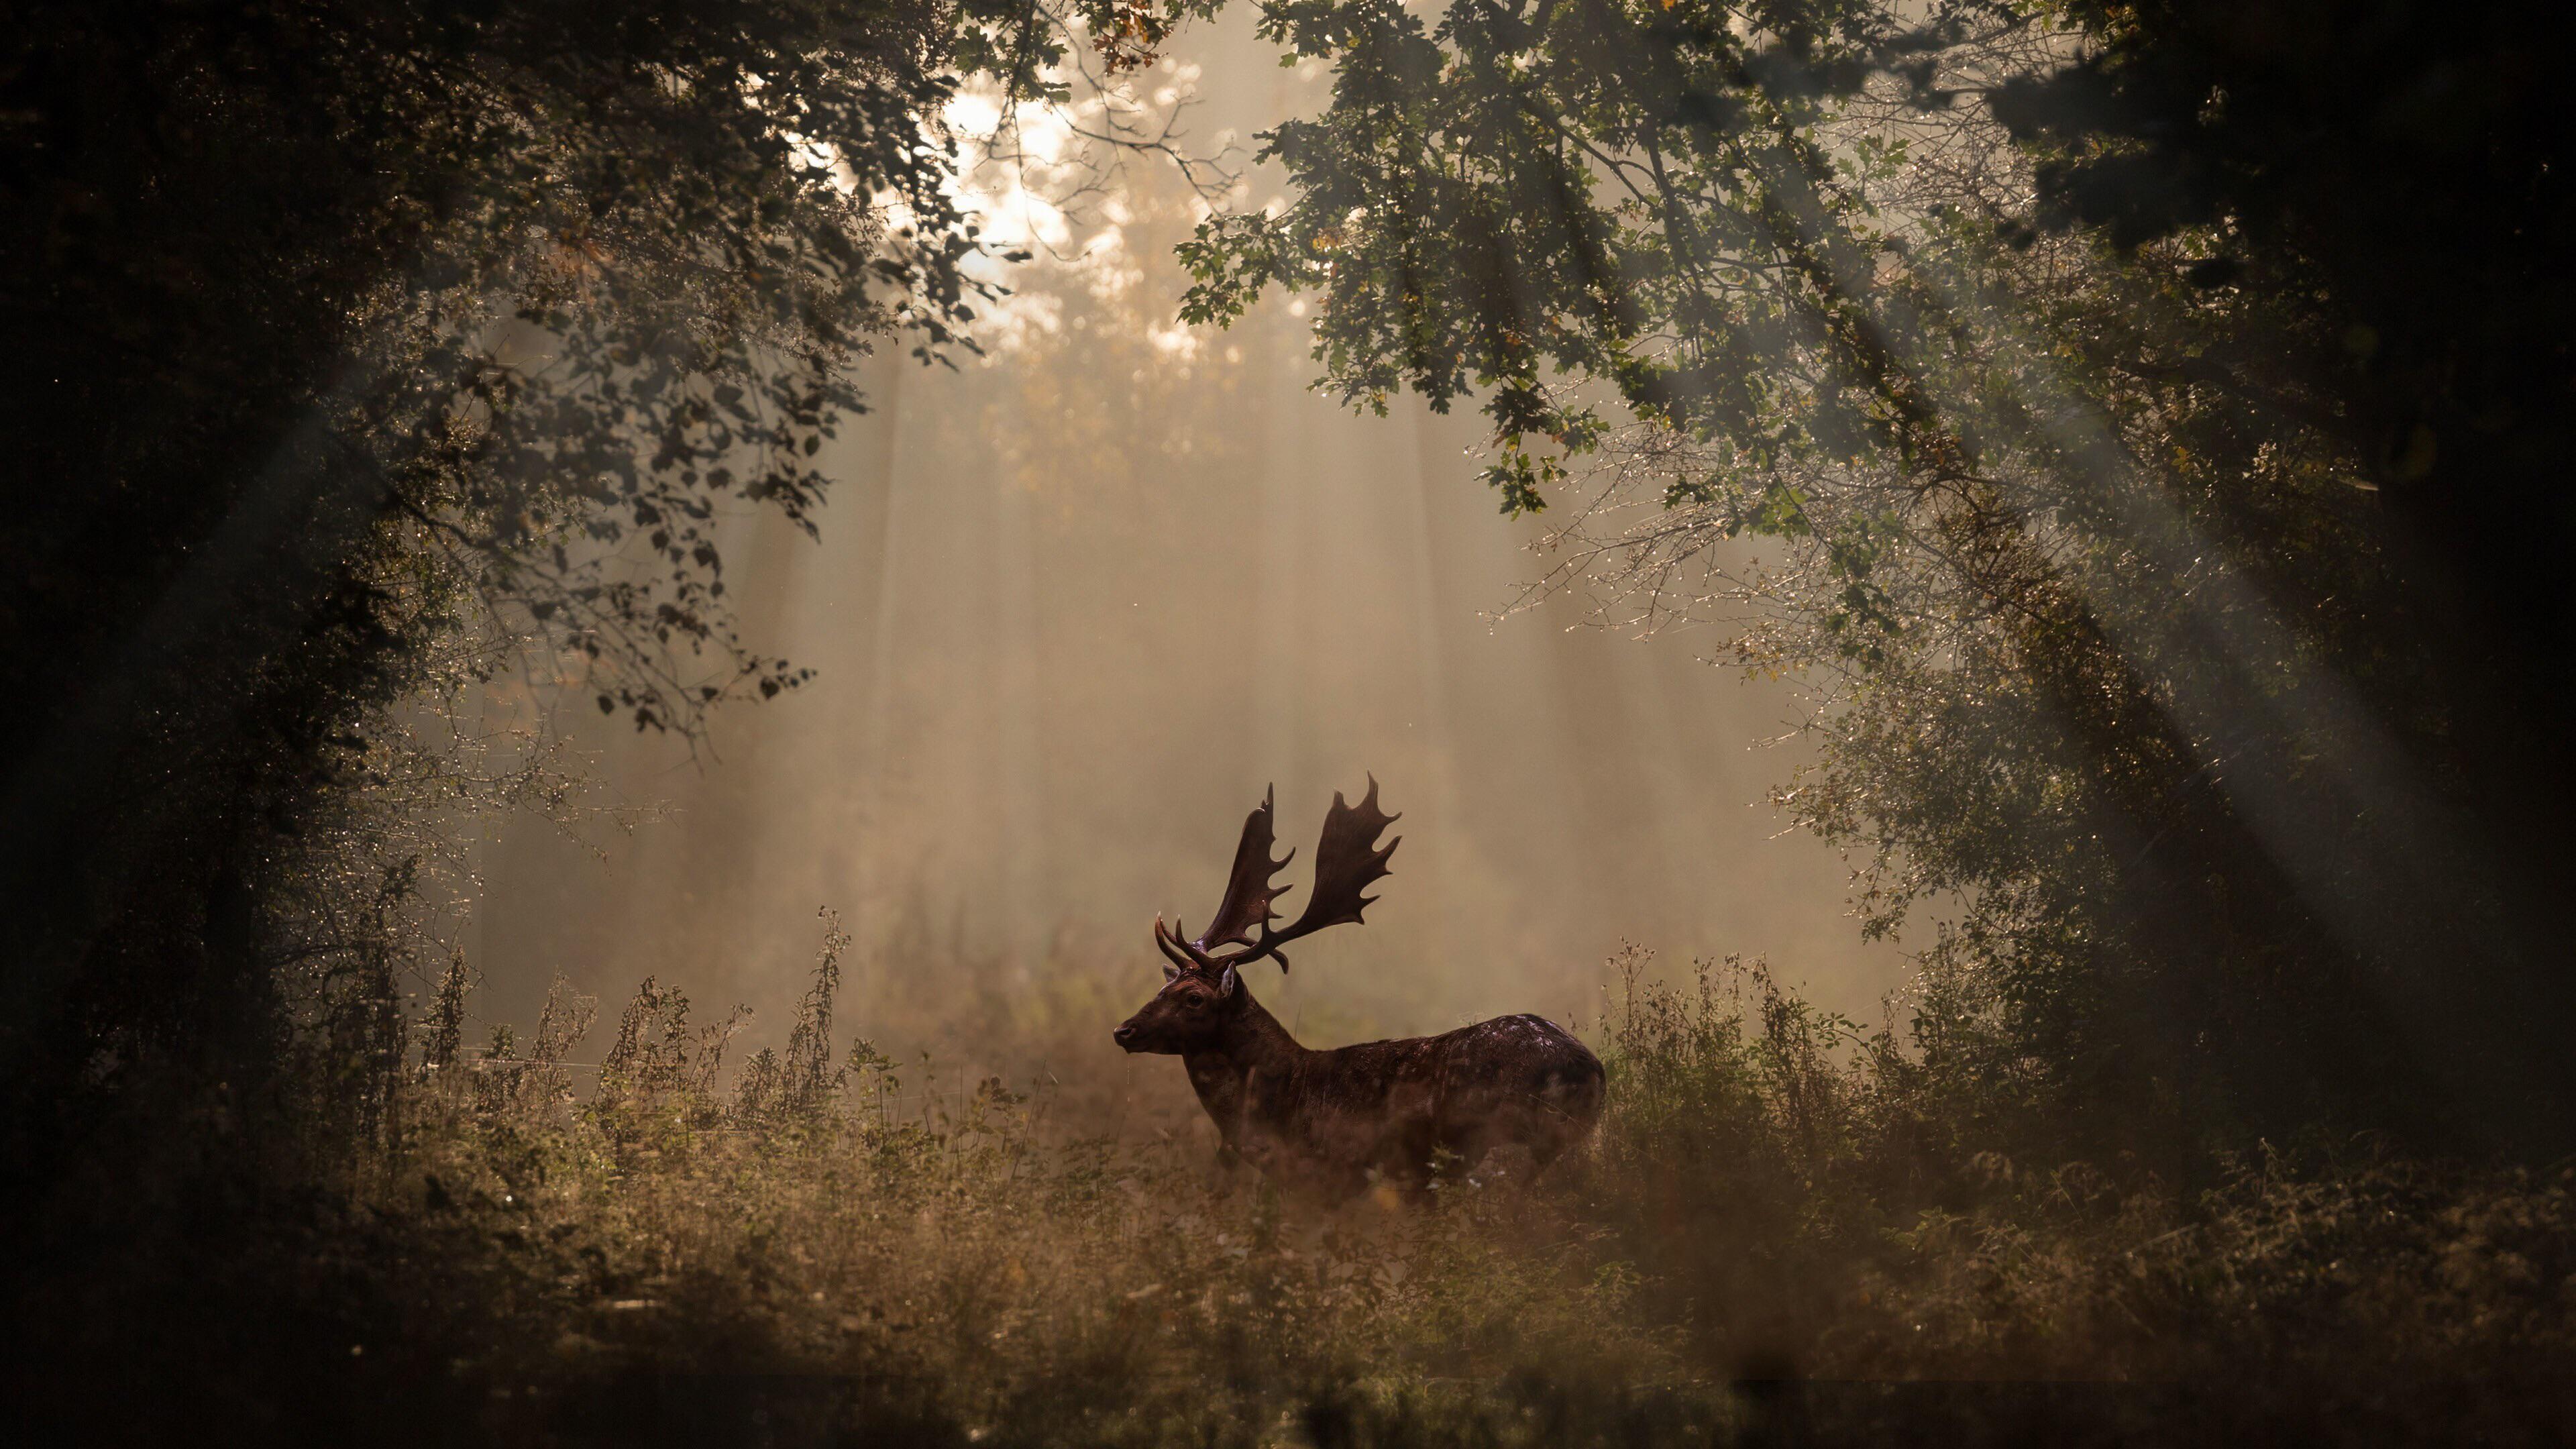 A deer standing in the middle of a forest. - Deer